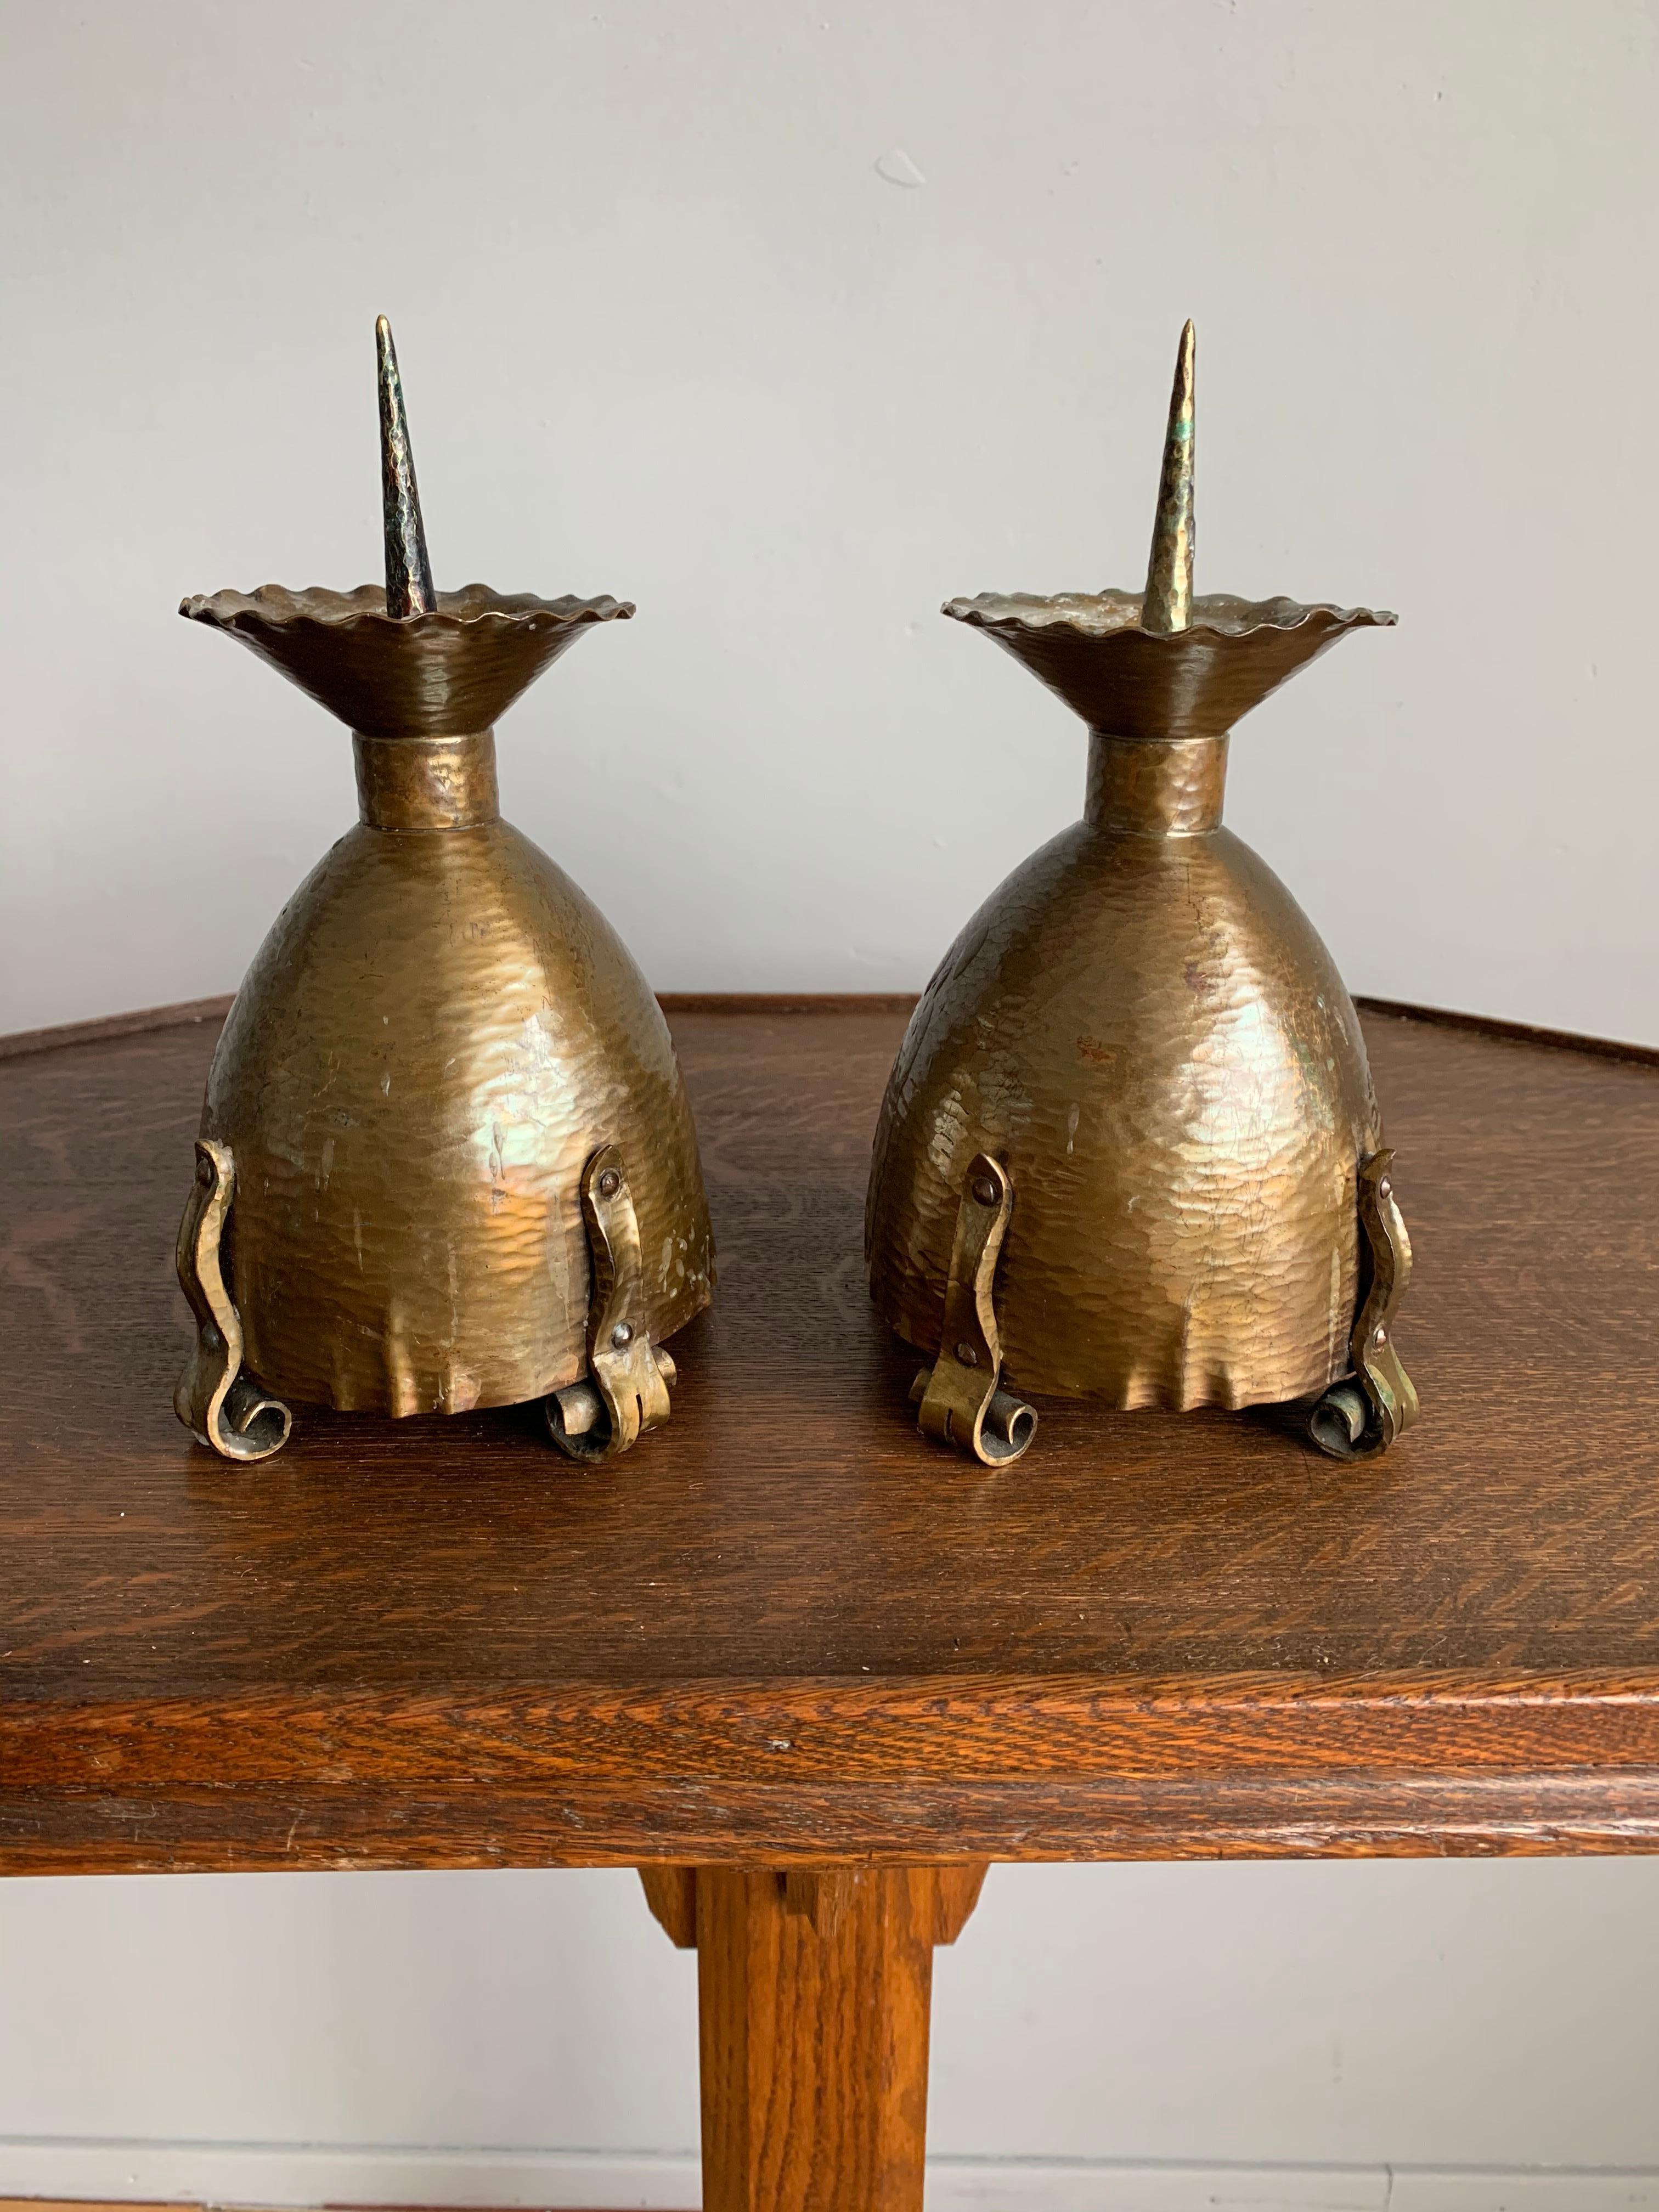 European Superbly Handcrafted Pair of Arts & Crafts Brass Candlesticks / Holders, 1910s For Sale